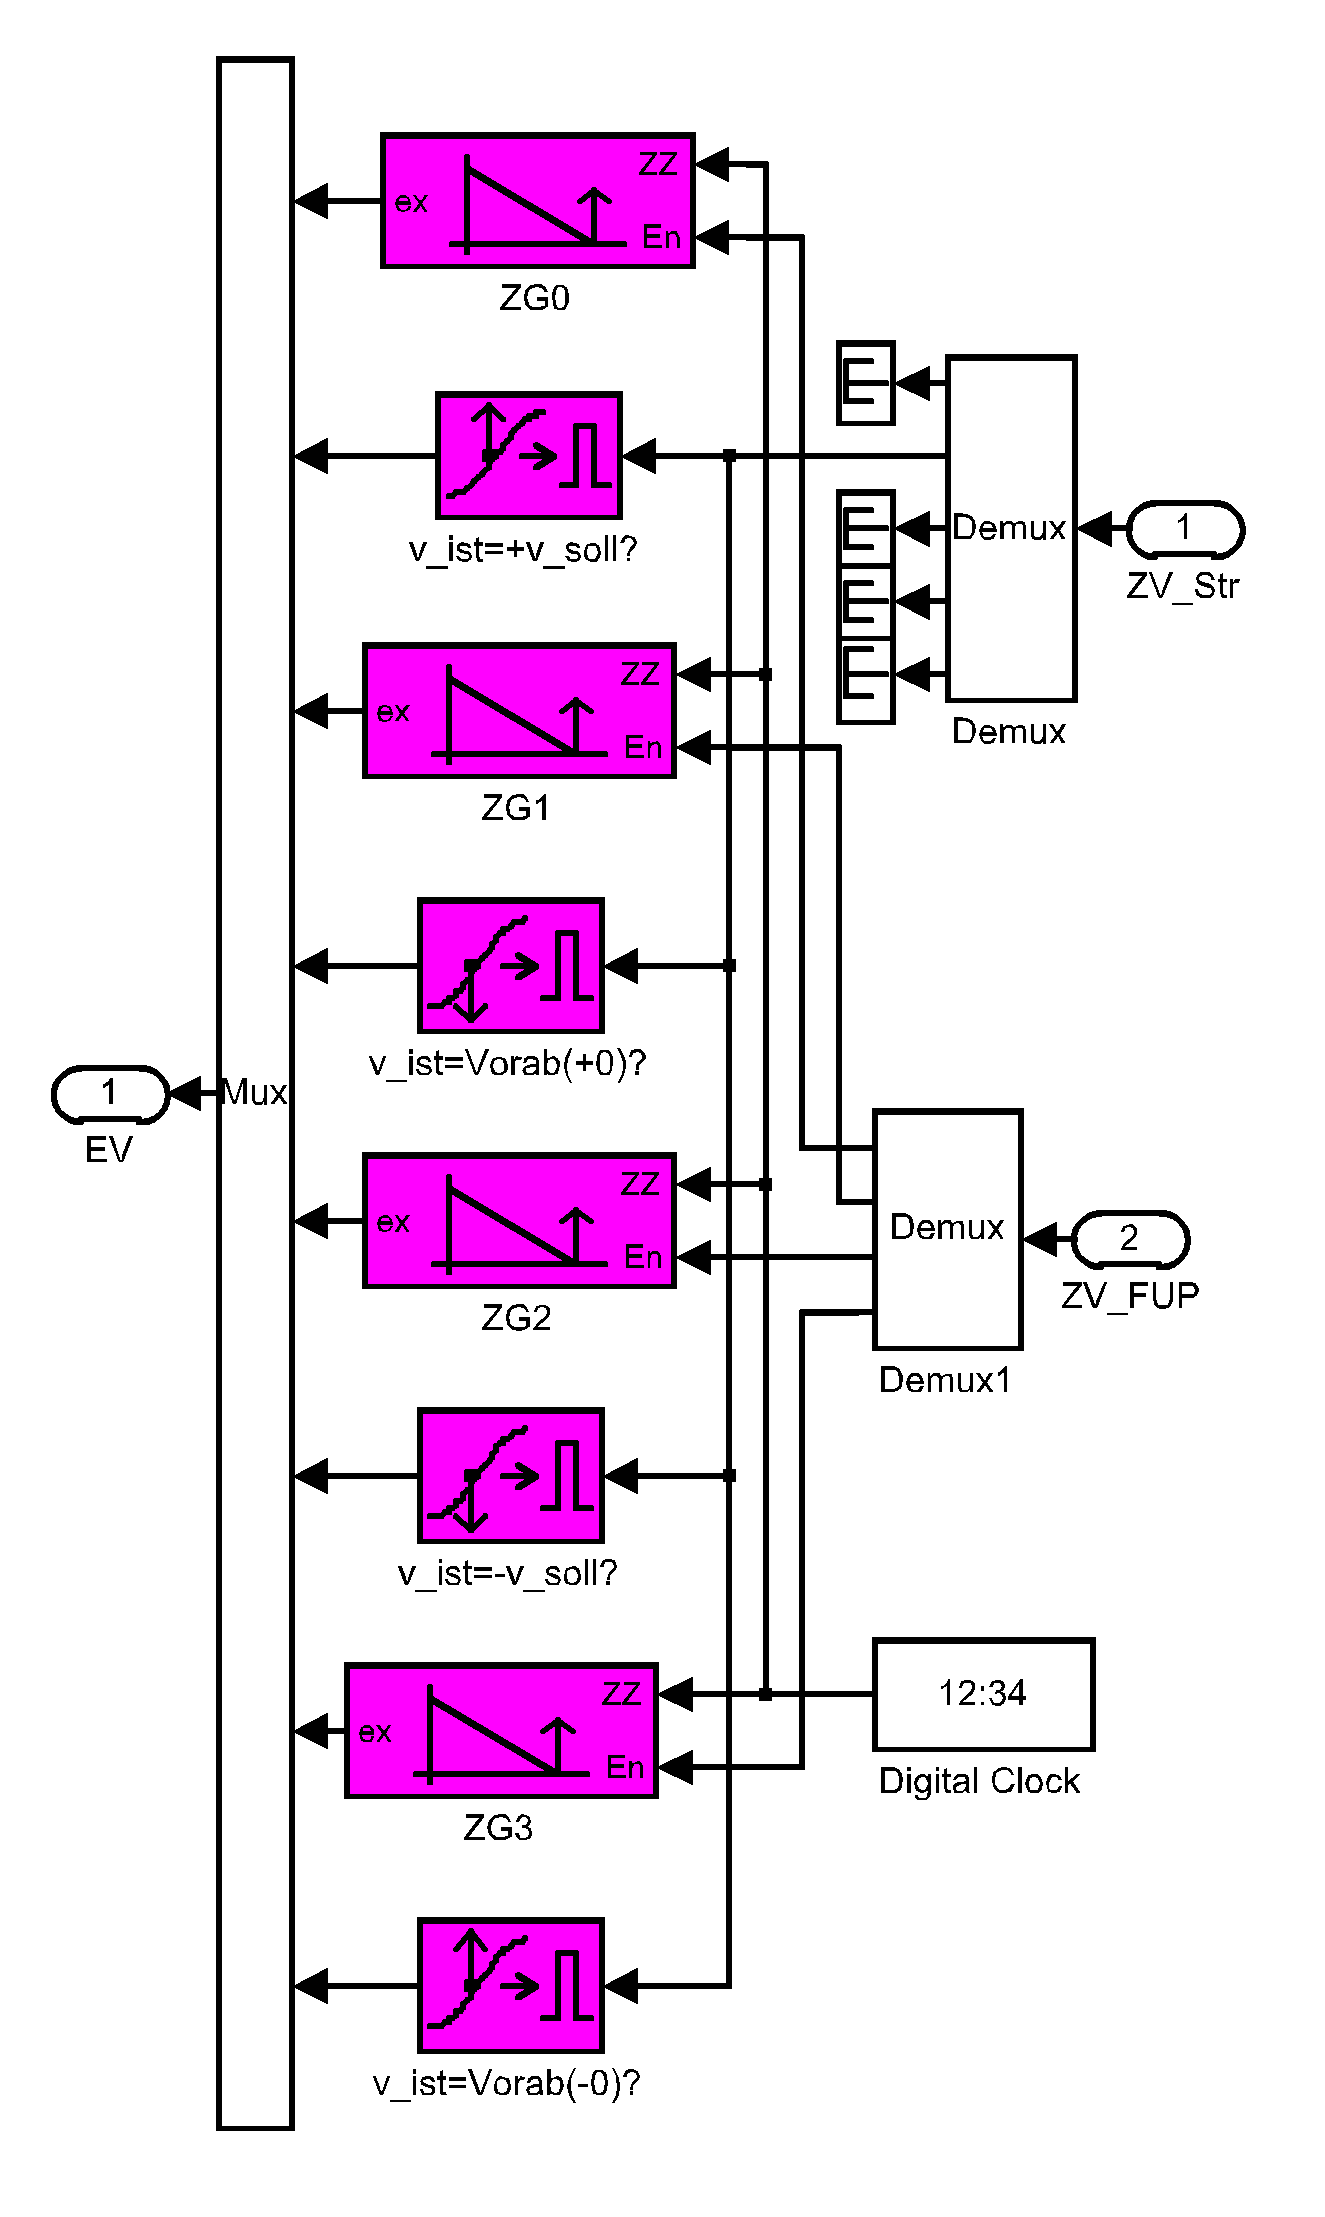 FUP-example 8: process connection